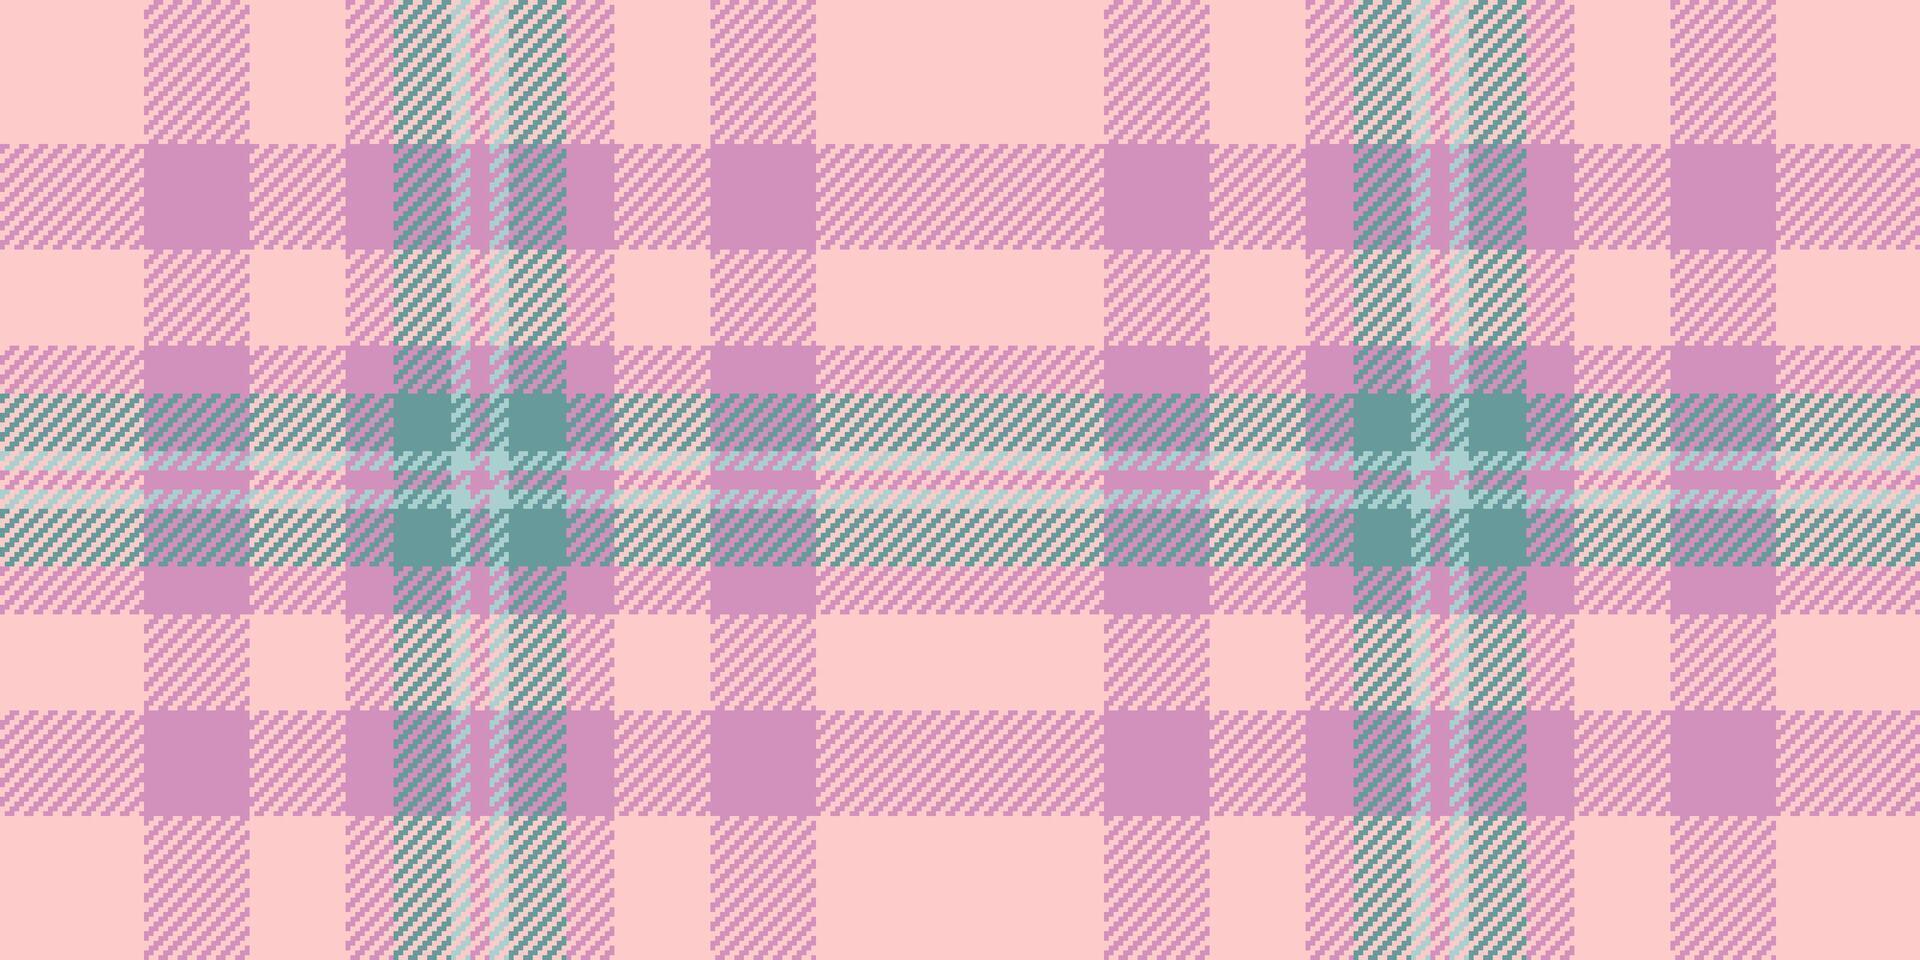 Straight fabric pattern plaid, shabby vector textile texture. Craft tartan background seamless check in light and pink colors.